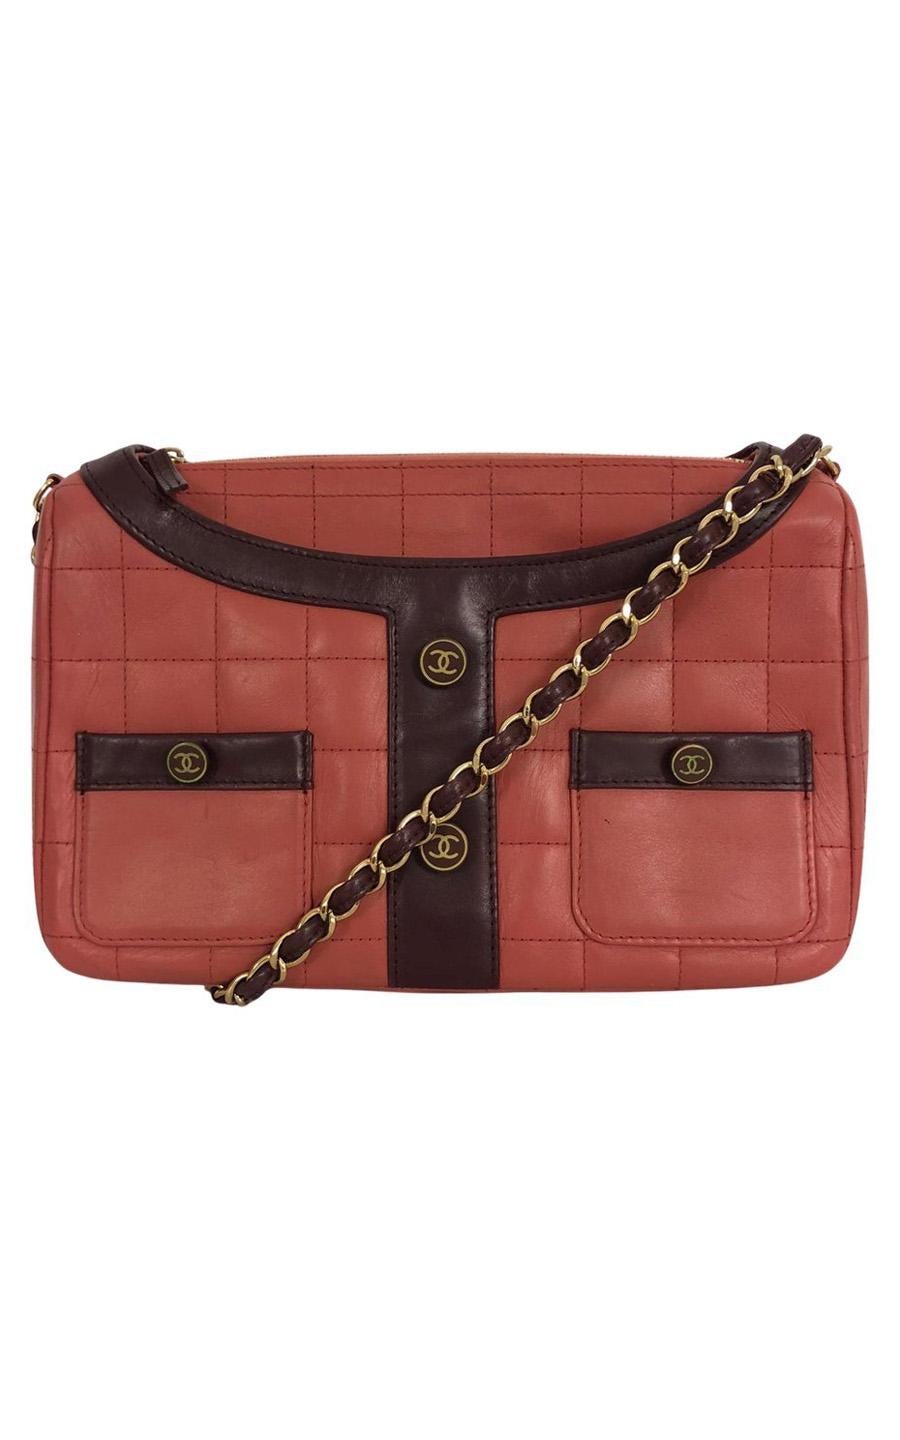 Chanel shoulder bag in red lambskin leather with purple leather details. The bag has gold colored hardware. The bag opens with a zipper. The red leather inside features one main compartment. In front, there are four slip-in pockets, at the back